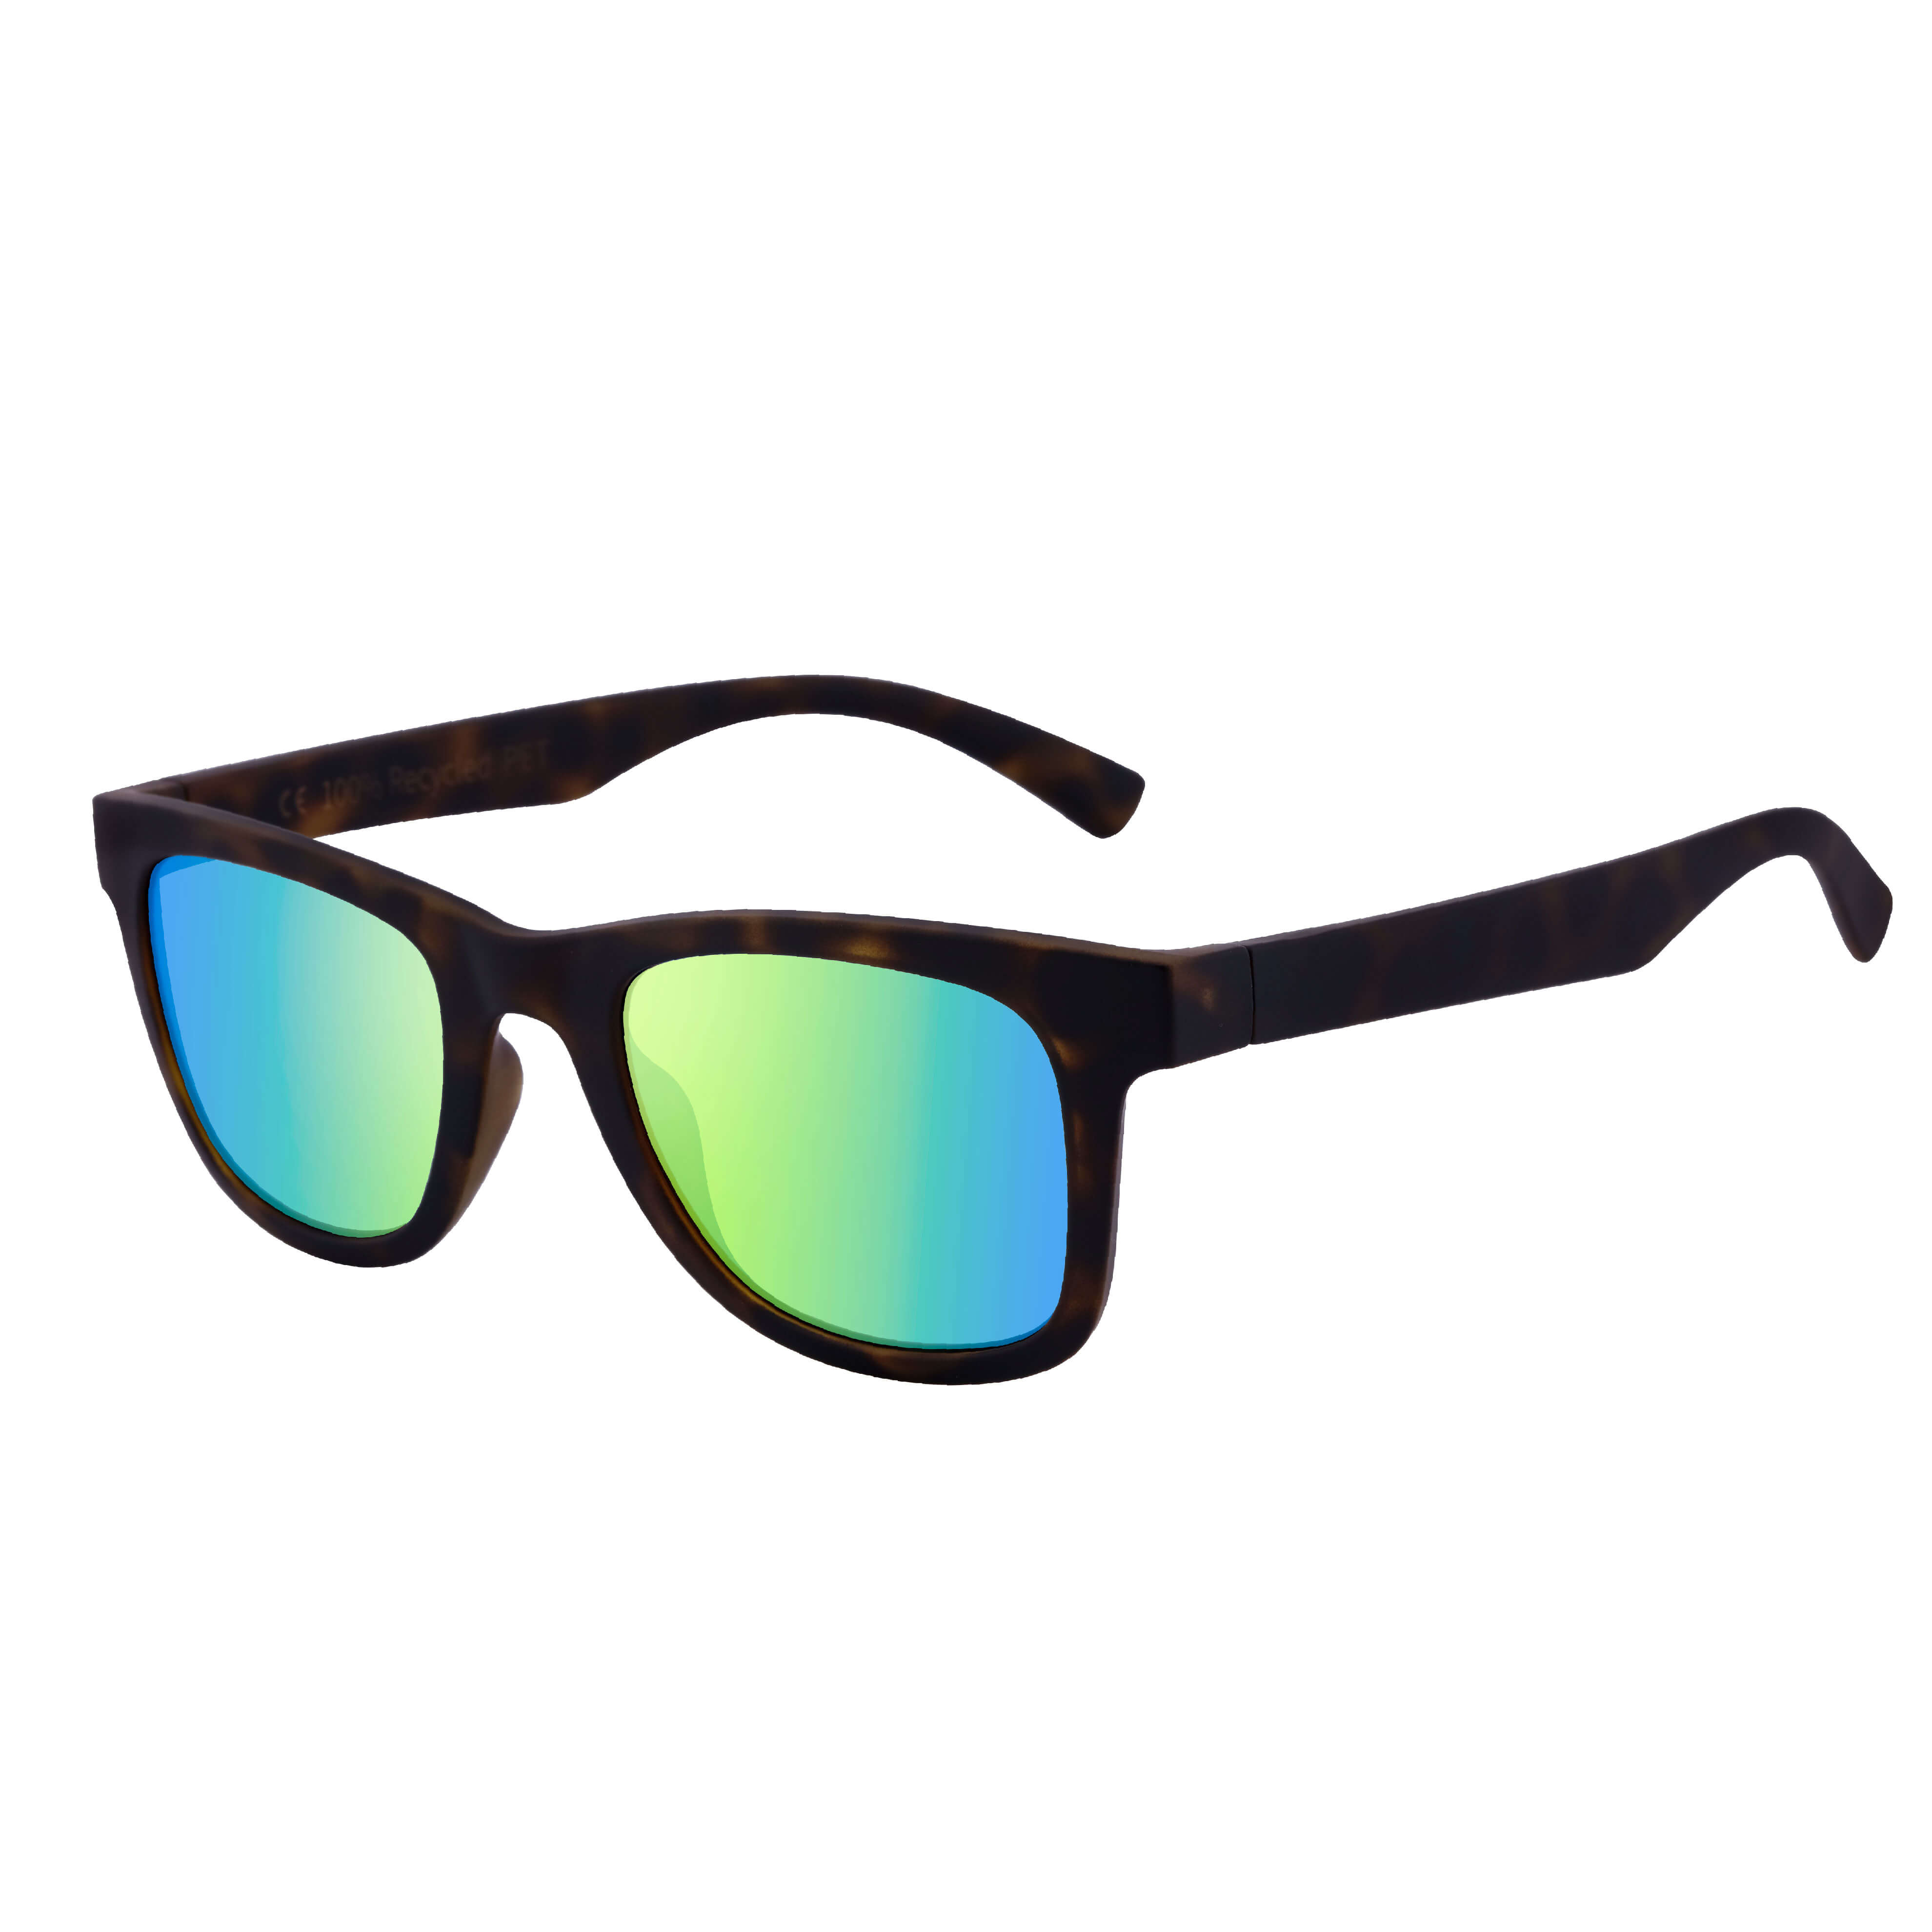 Eco-Friendly Sustainable Sunglasses –100% Recycled PET Frame